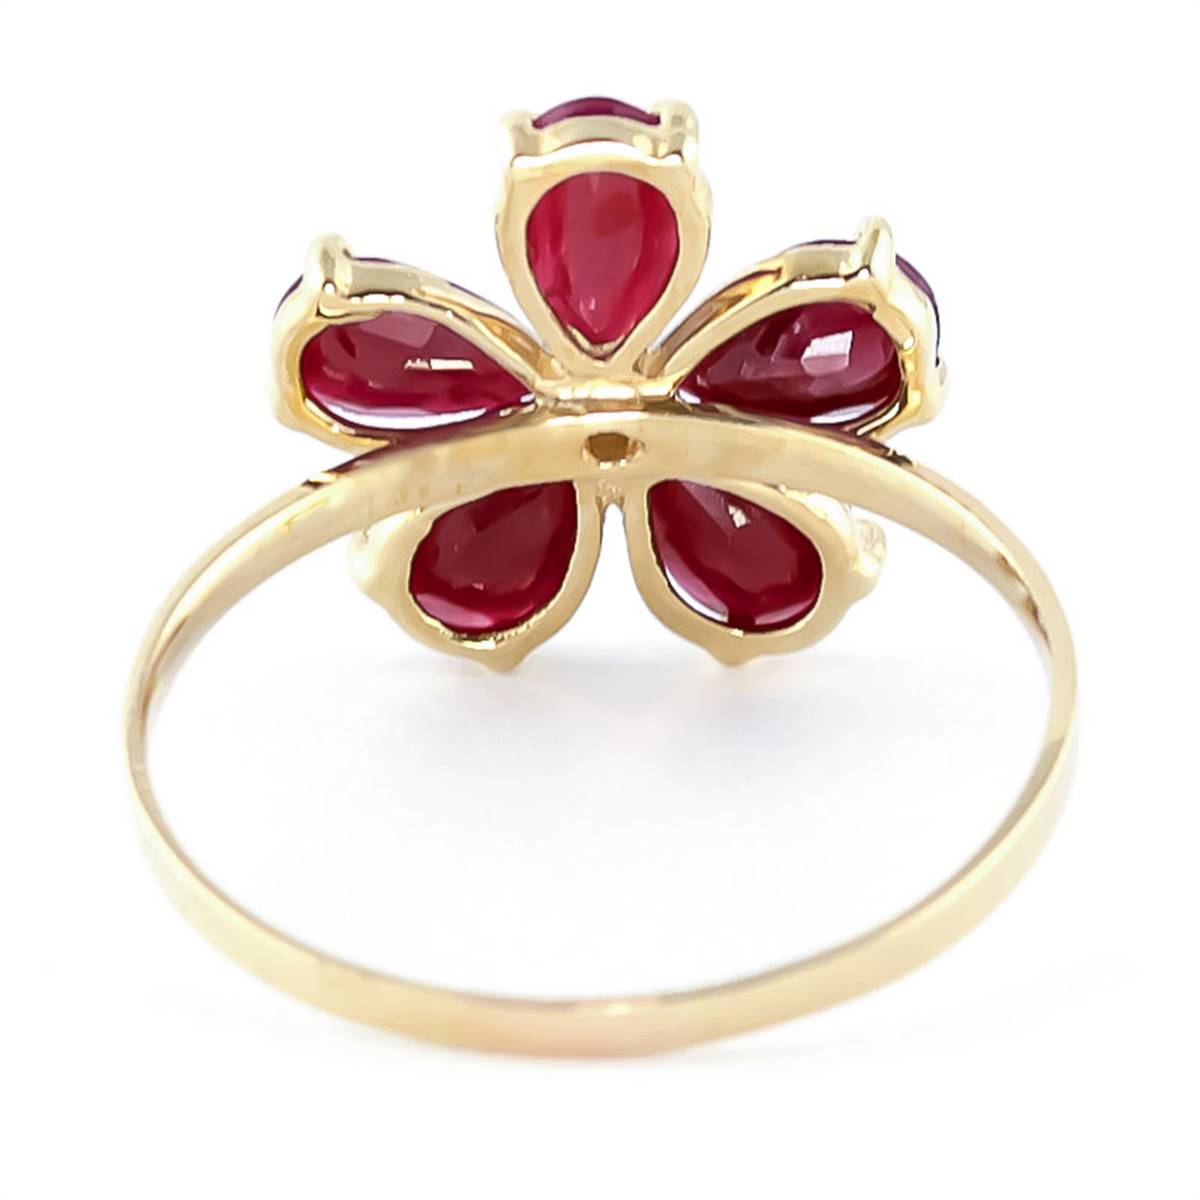 2.22 Carat 14K Solid Yellow Gold Fits Like A Glove Ruby Diamond Ring